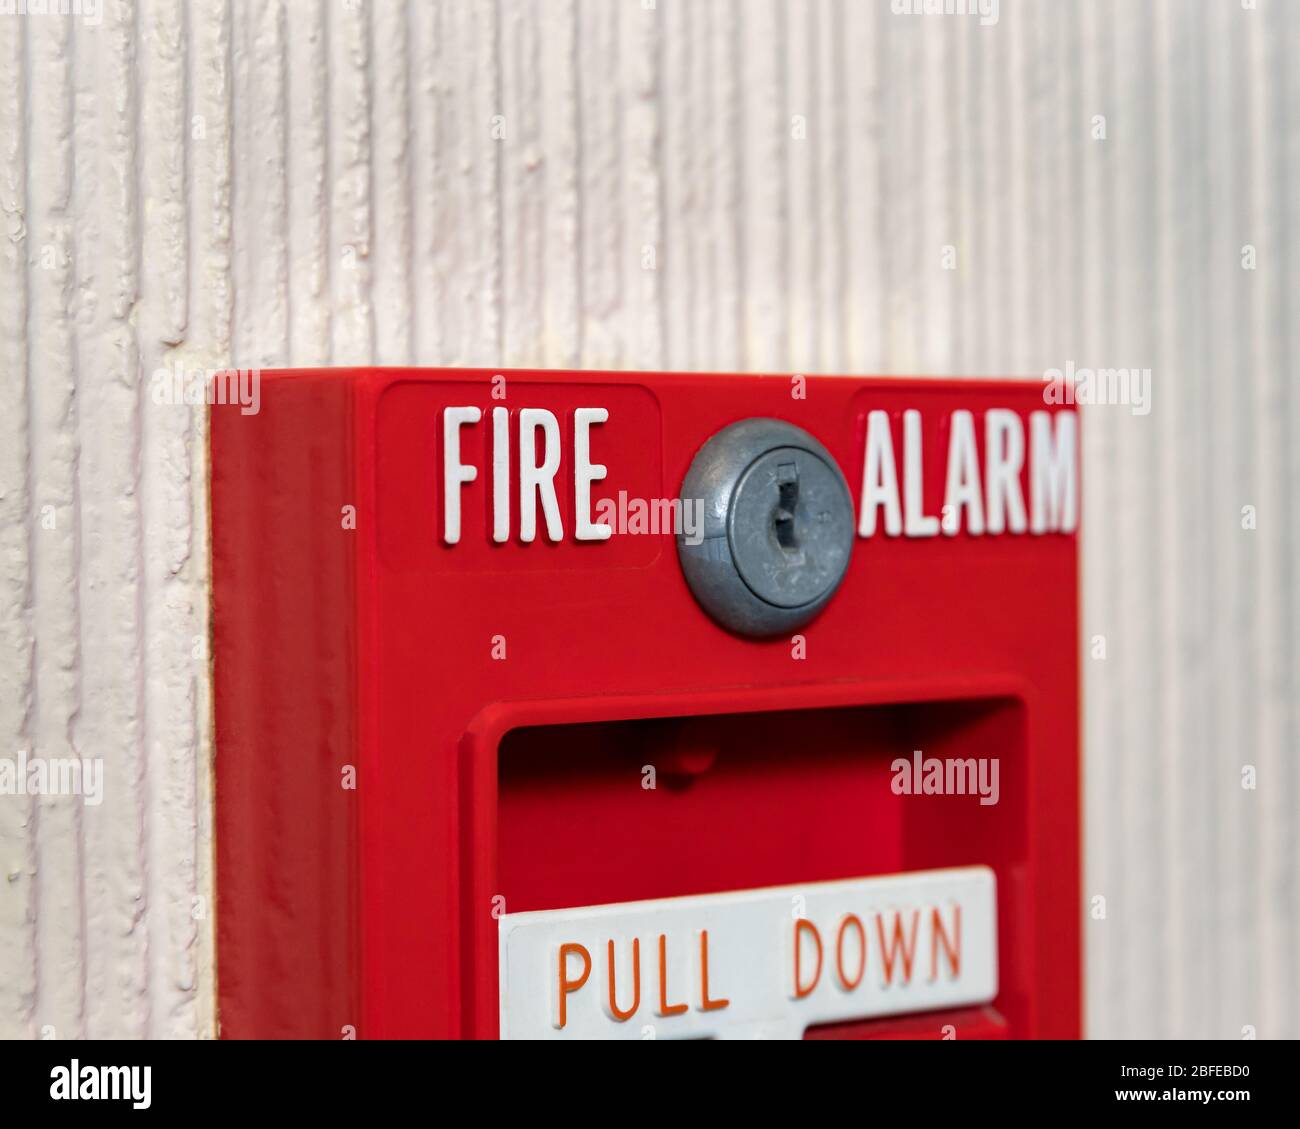 Fire alarm system pull station. Concept of fire safety, fire drill, evacuation plan Stock Photo